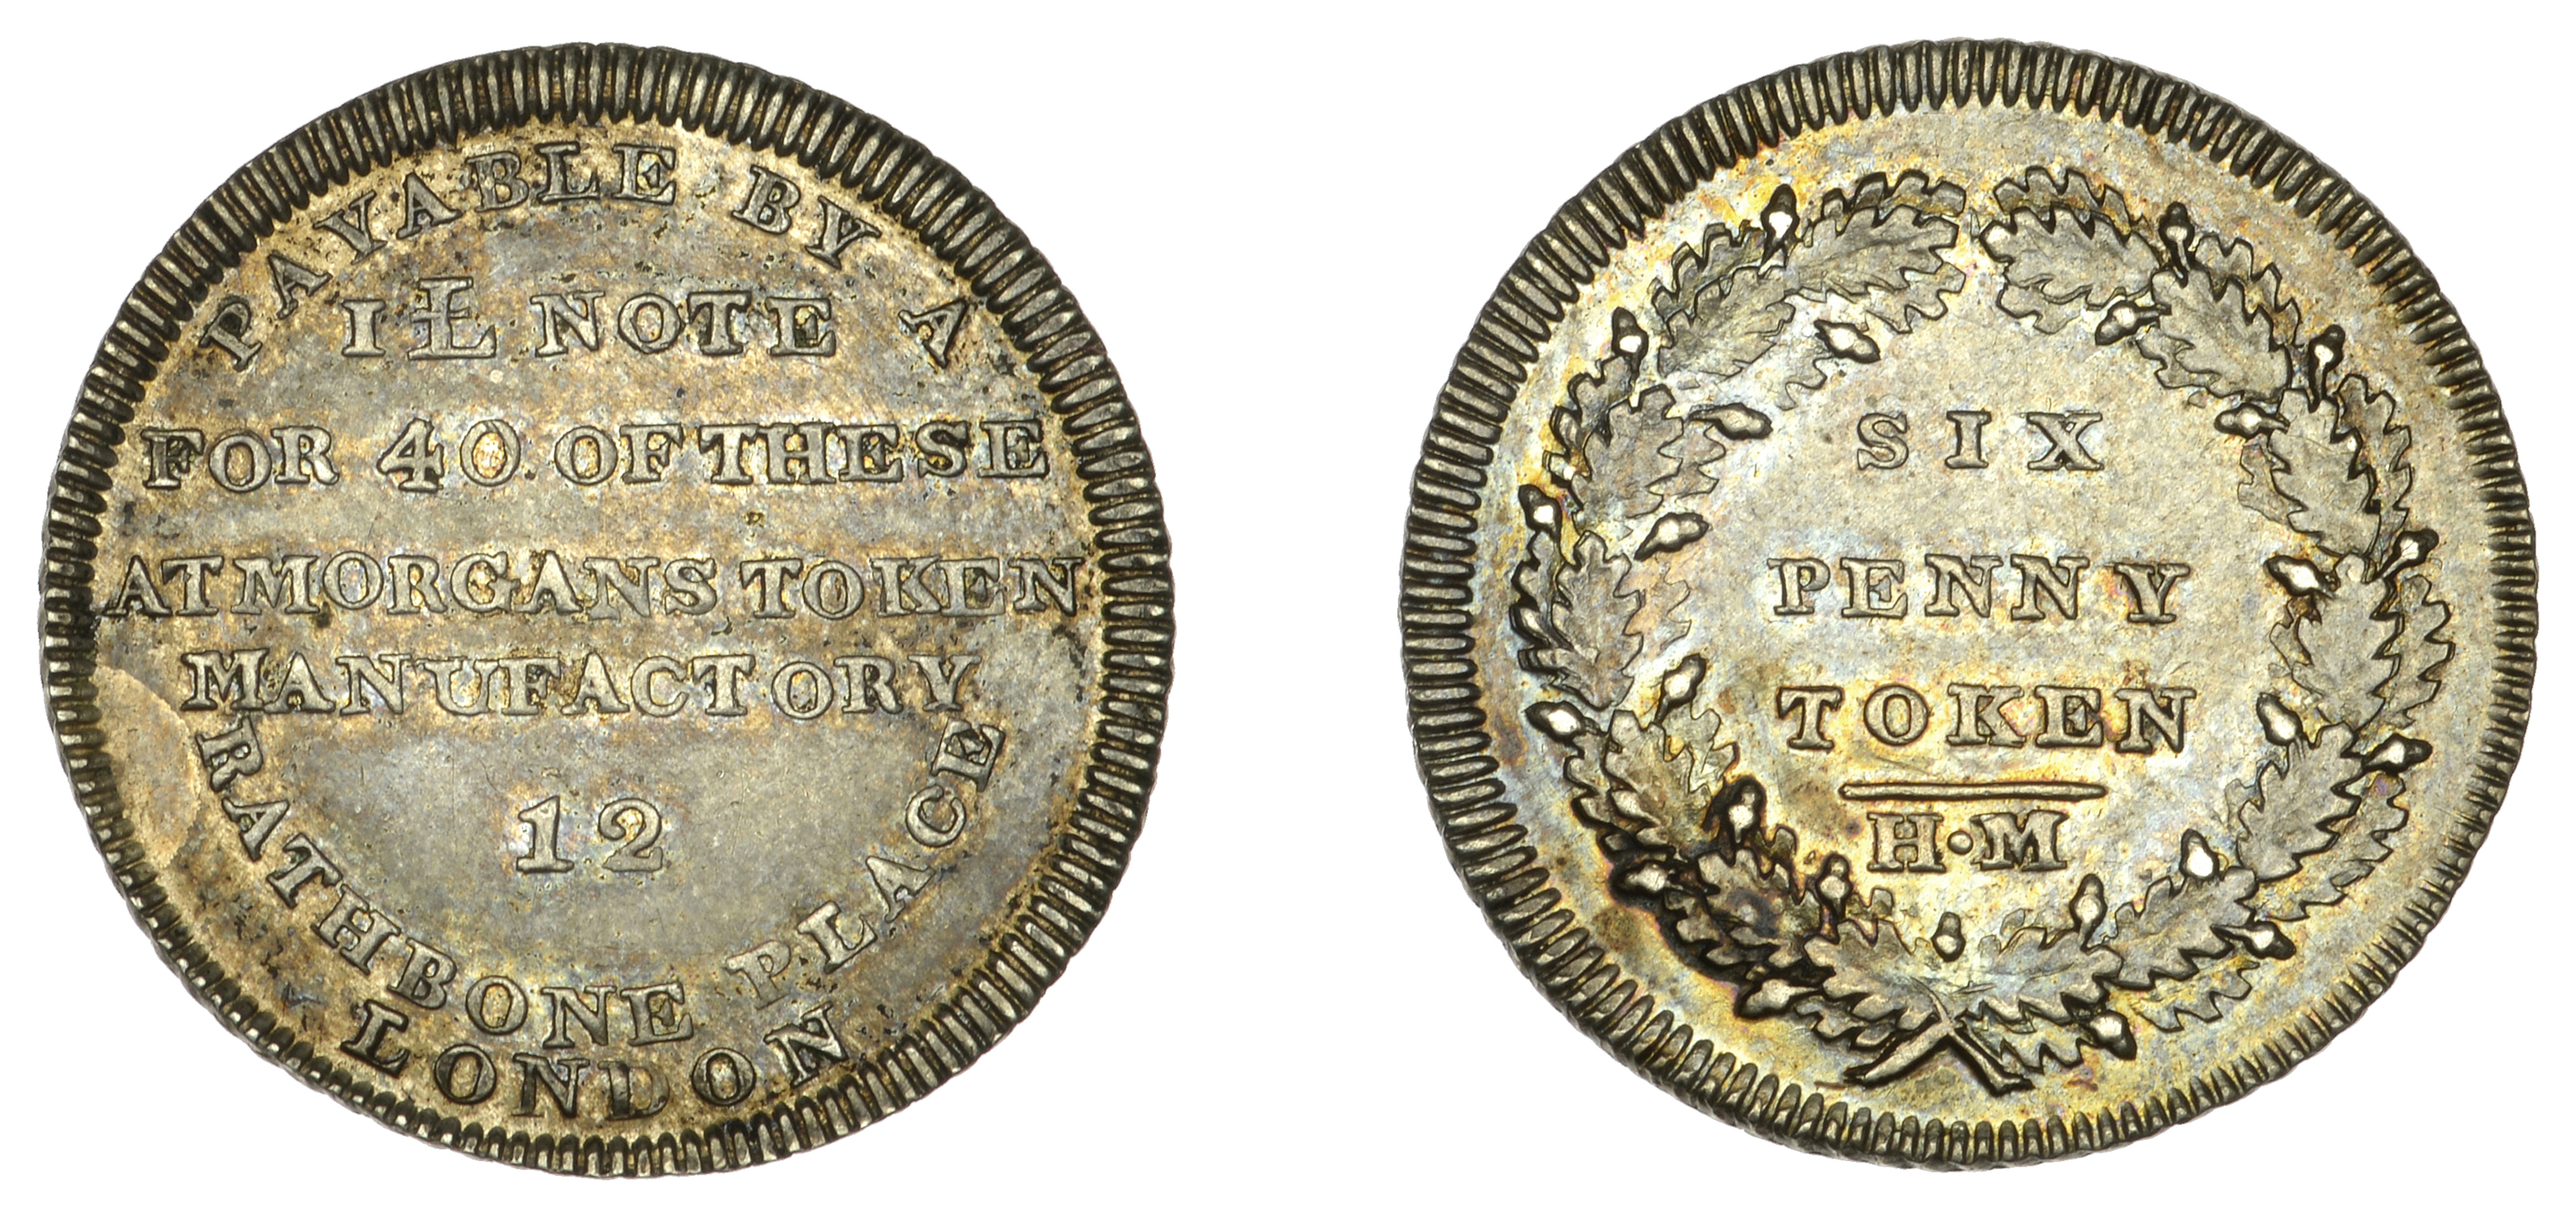 The Collection of 19th Century Tokens formed by John Akins (Part II)